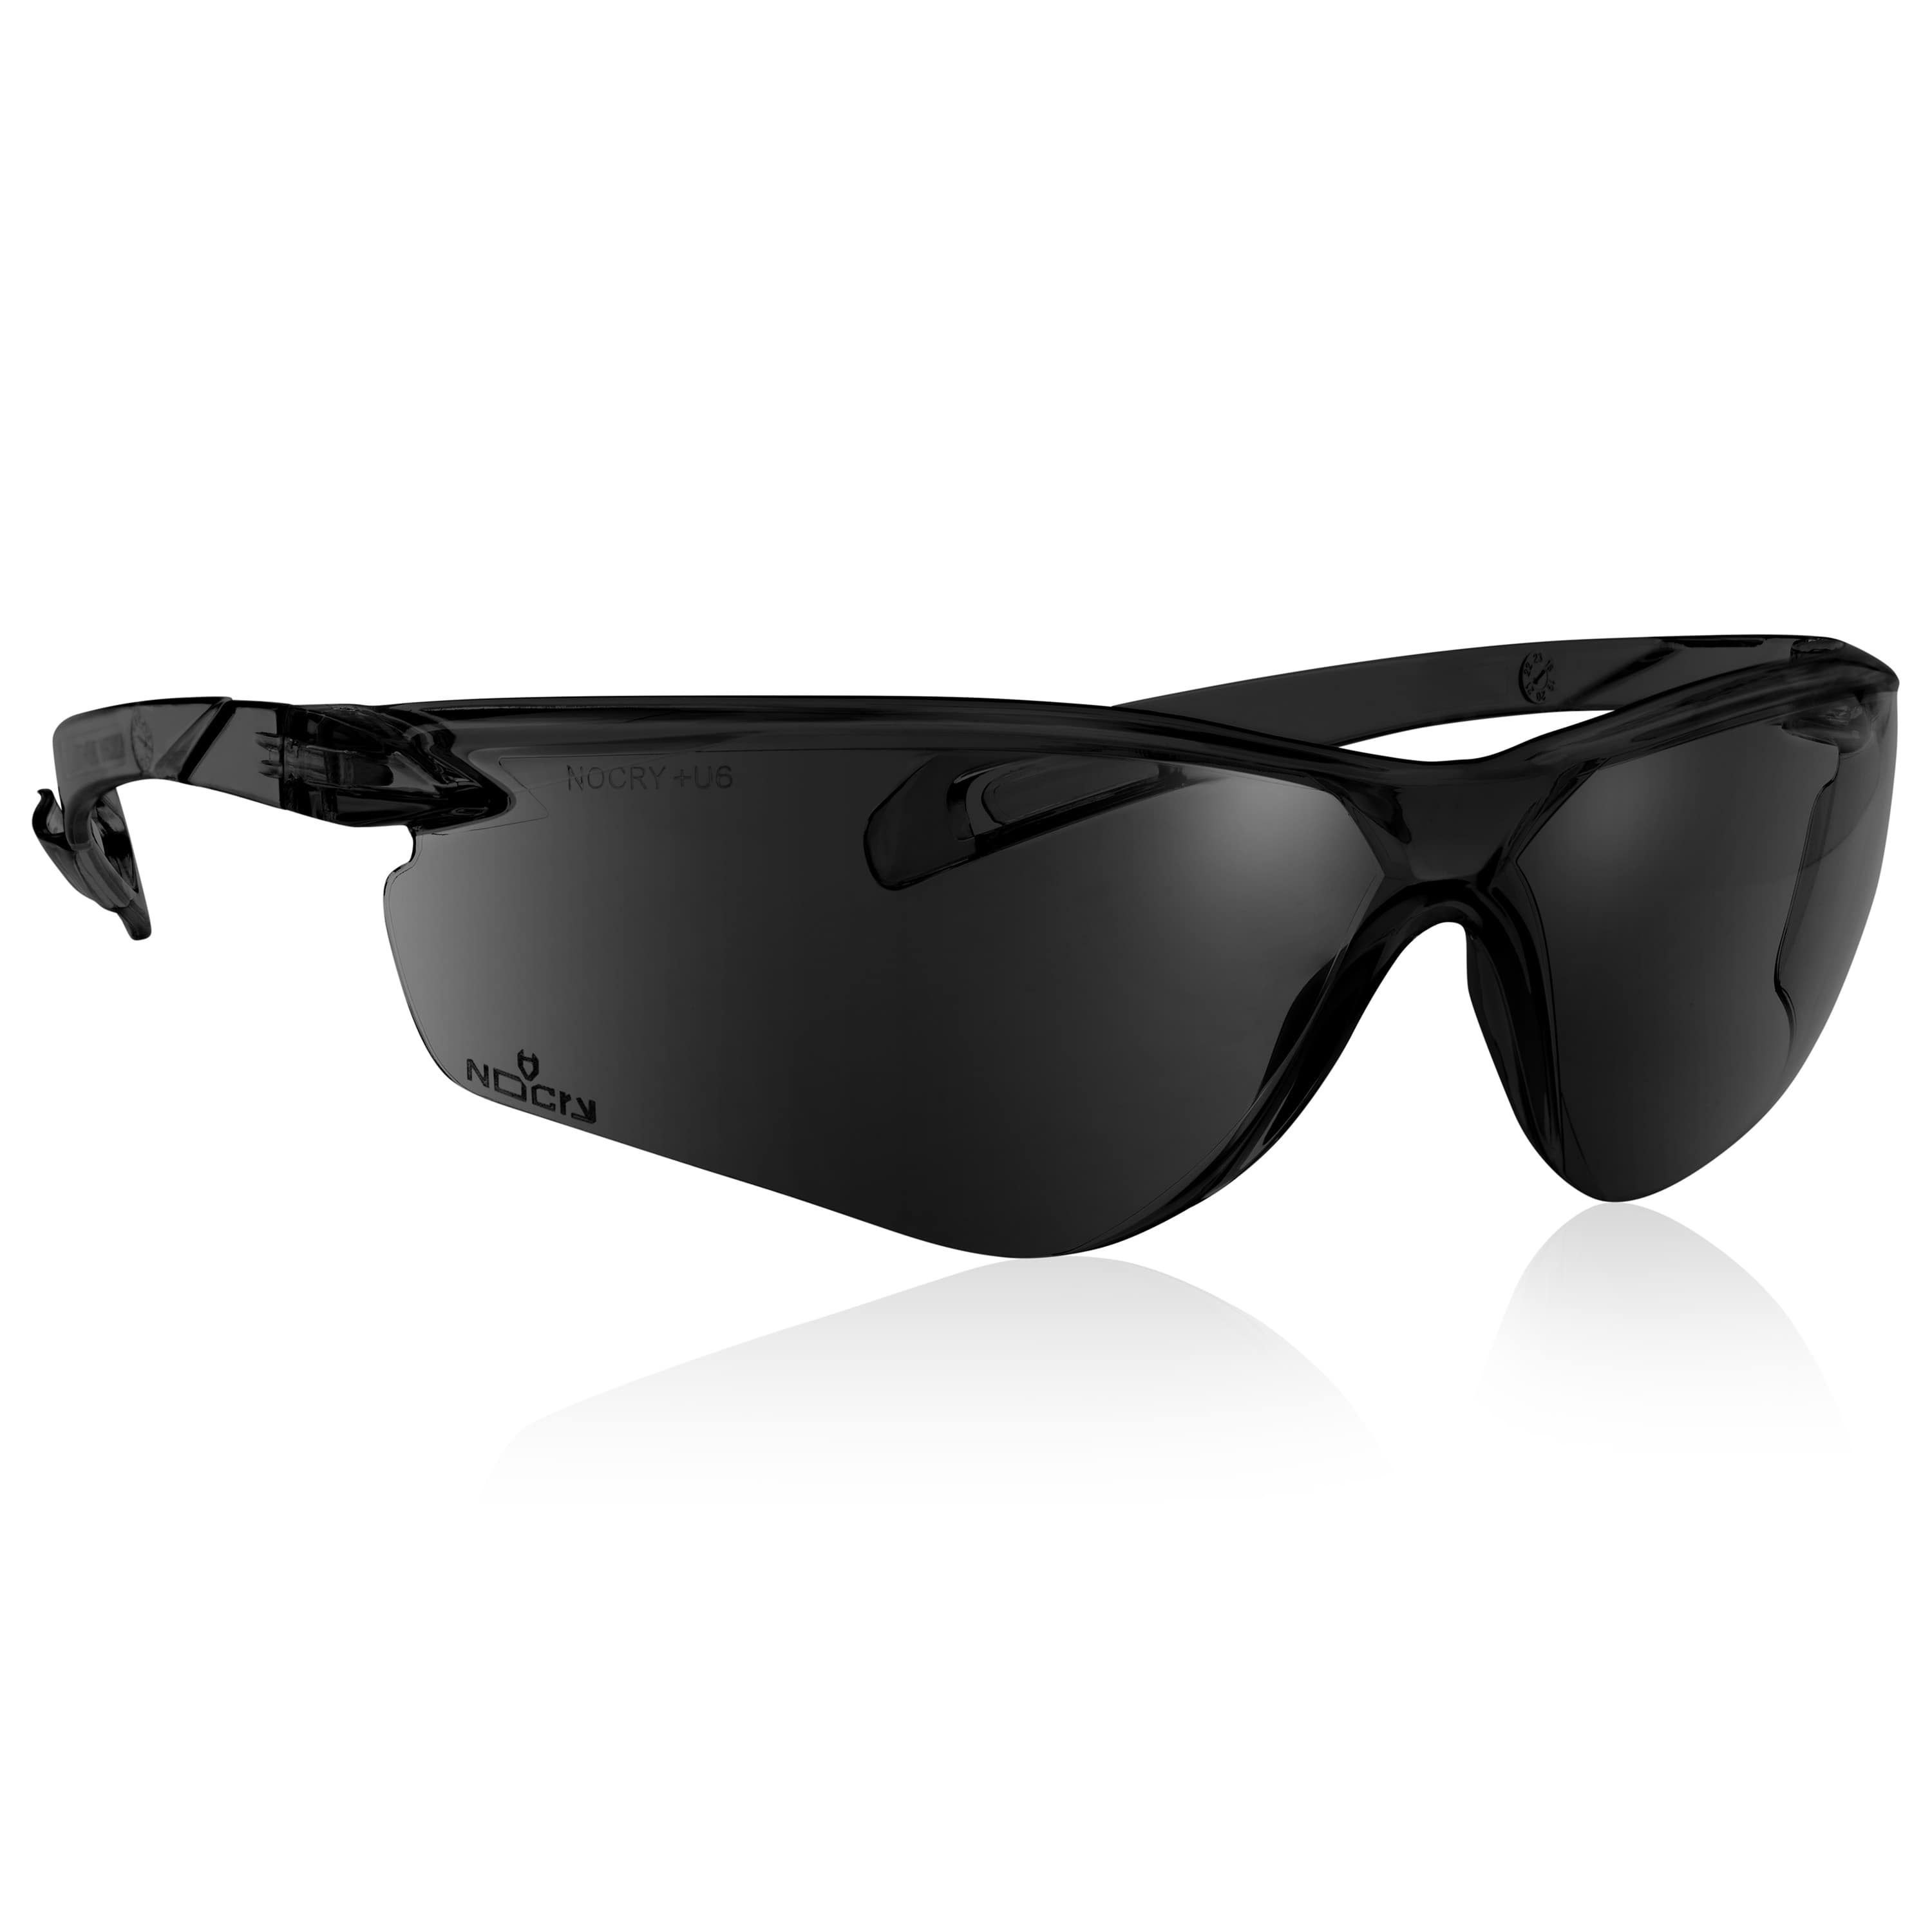 NoCry Safety Sunglasses with Green Tinted Scratch Resistant Wrap-Around Lenses and No-Slip Grips, UV 400 Protection. Adjustable